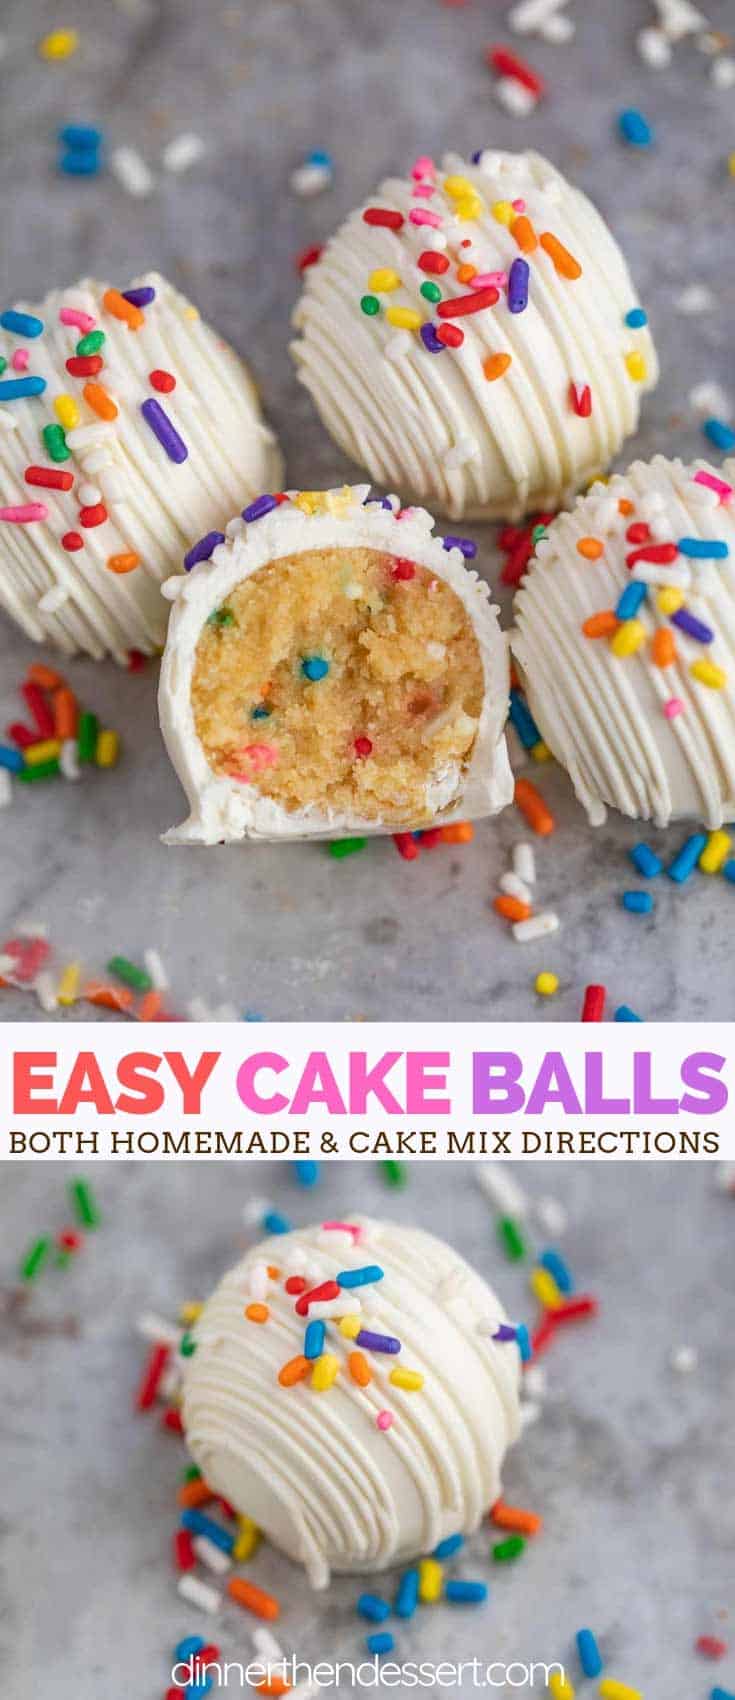 How To Make Cake Pops With Cake Mix